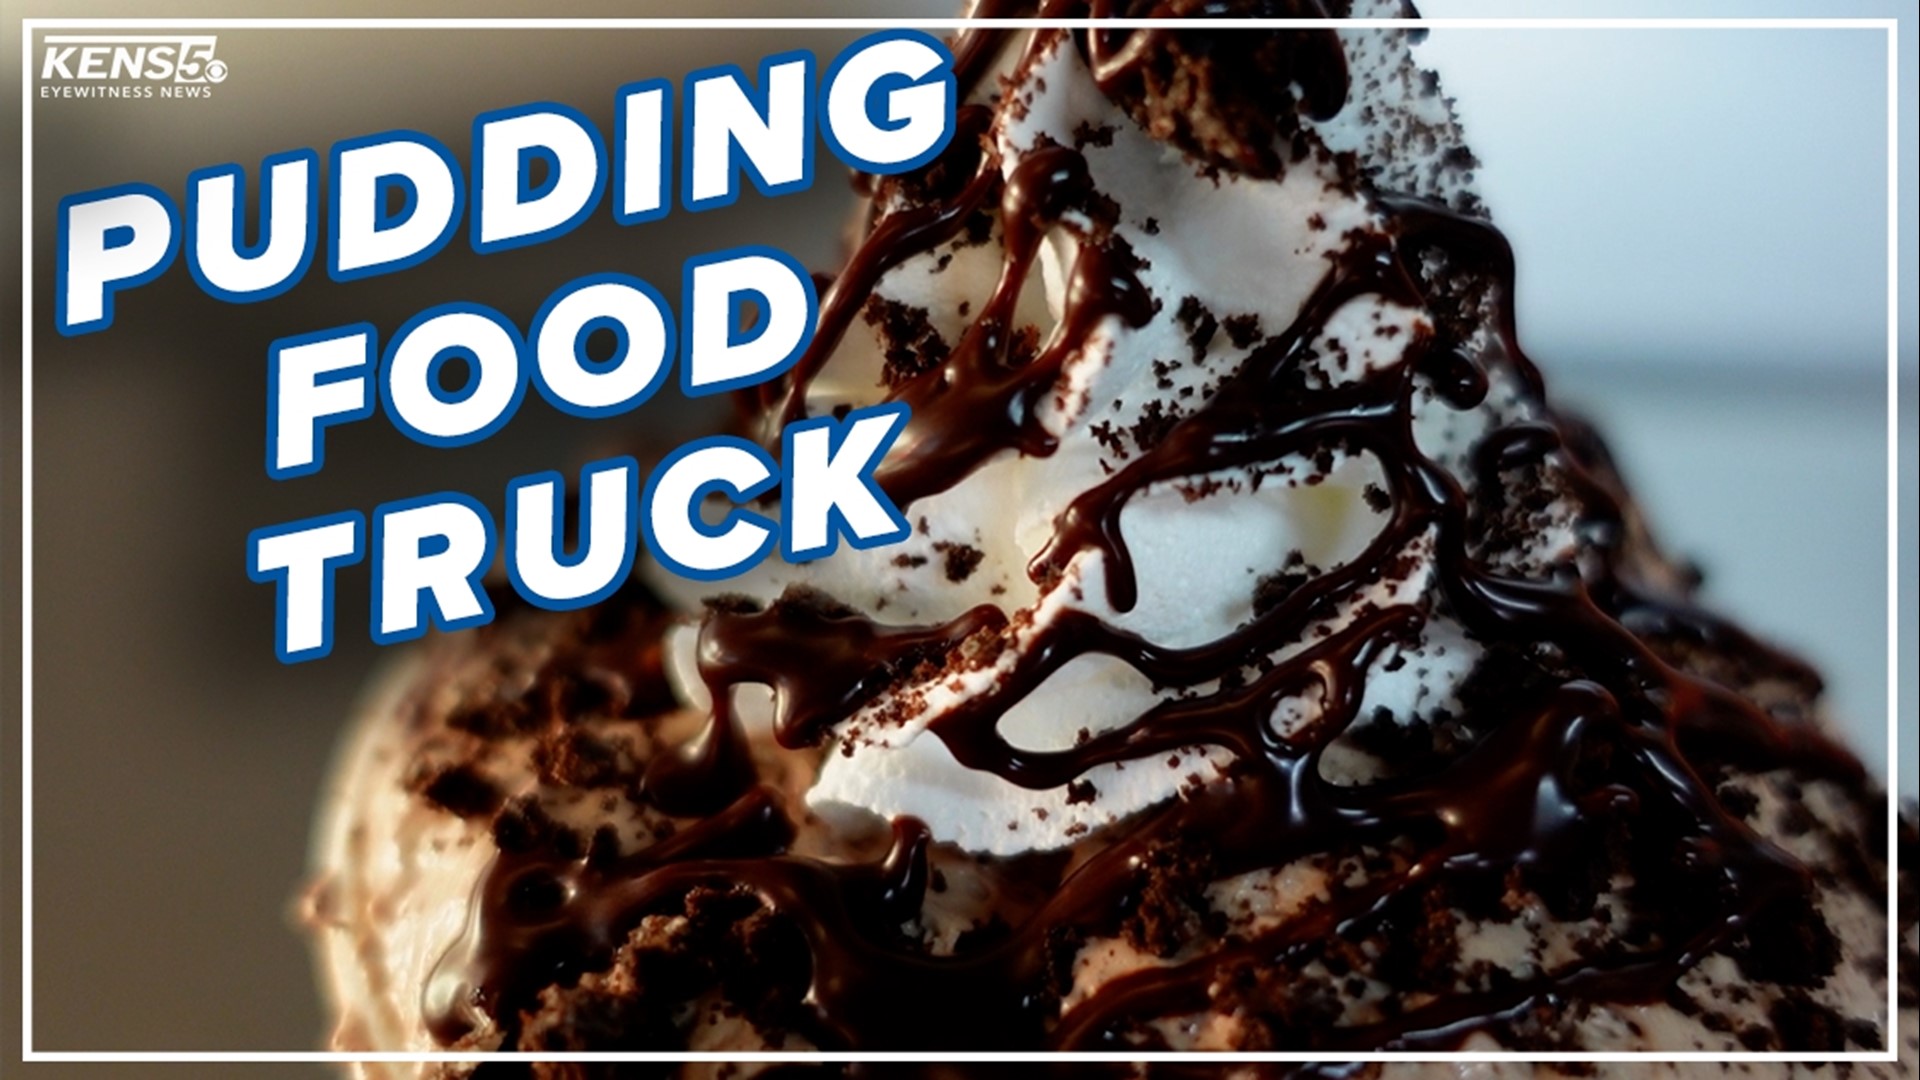 Puddin' It Out There's most popular flavor is chocolate. And they make at least 28 gallons a day of that one alone. Lexi Hazlett tried it on Food Truck Frenzy.